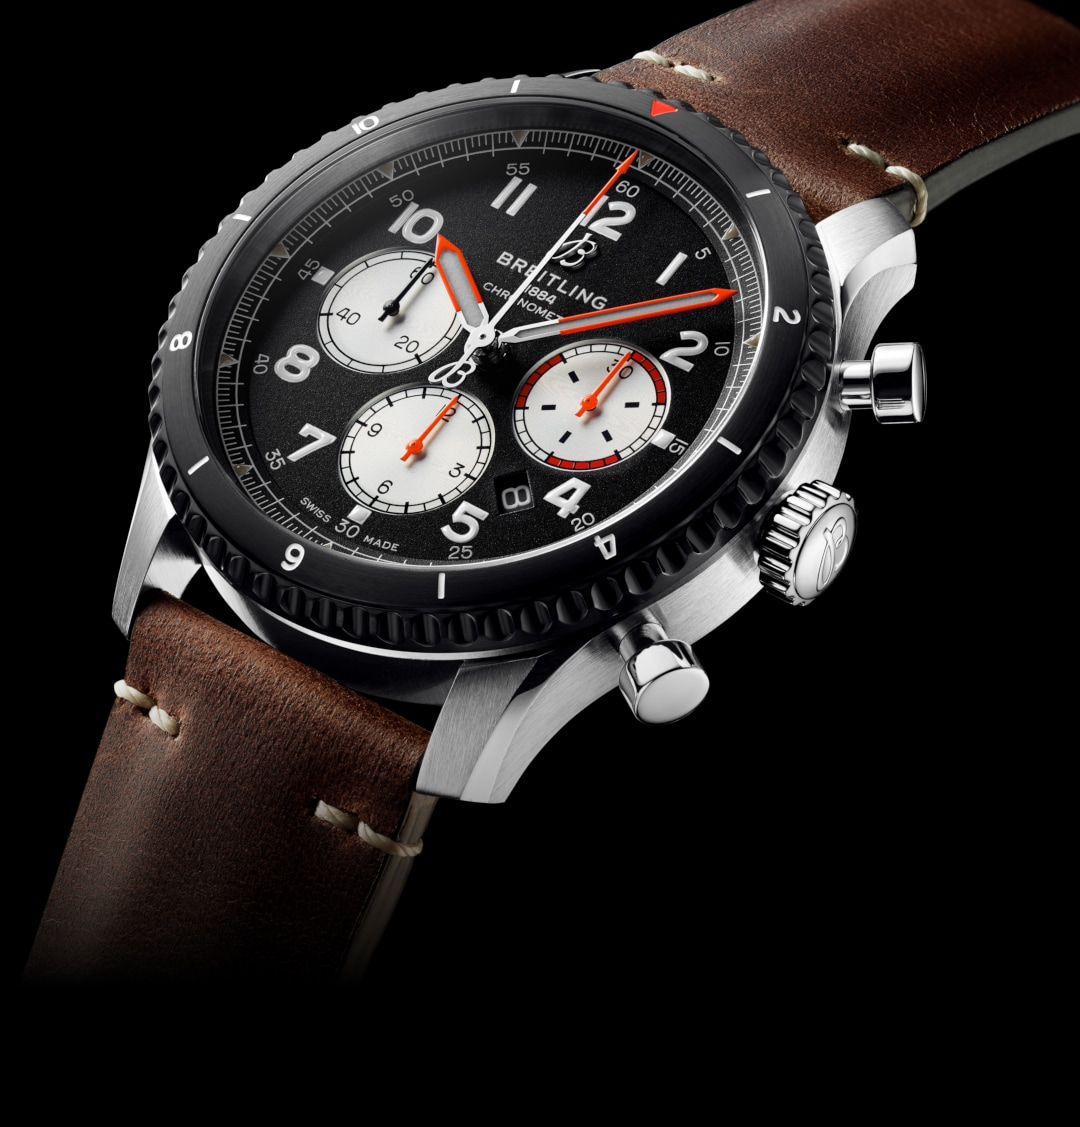 Breitling Swiss Luxury Watches Of Style Purpose Action - 